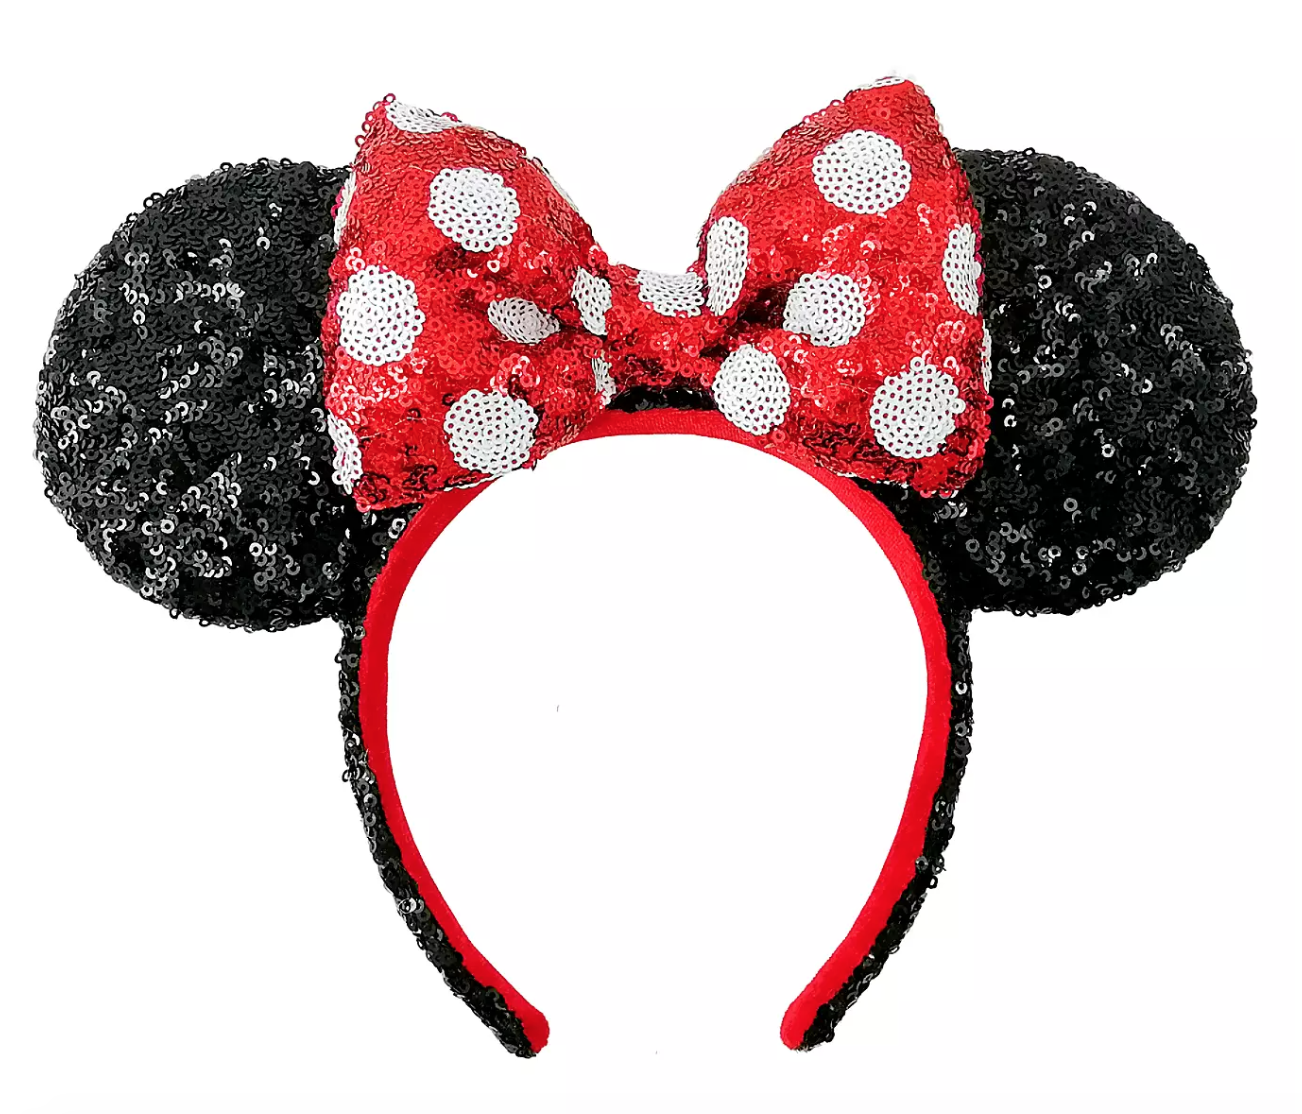 Disney's Reimagined ❤️Classic Minnie Ears🖤 Have Finally Arrived Online! -  AllEars.Net